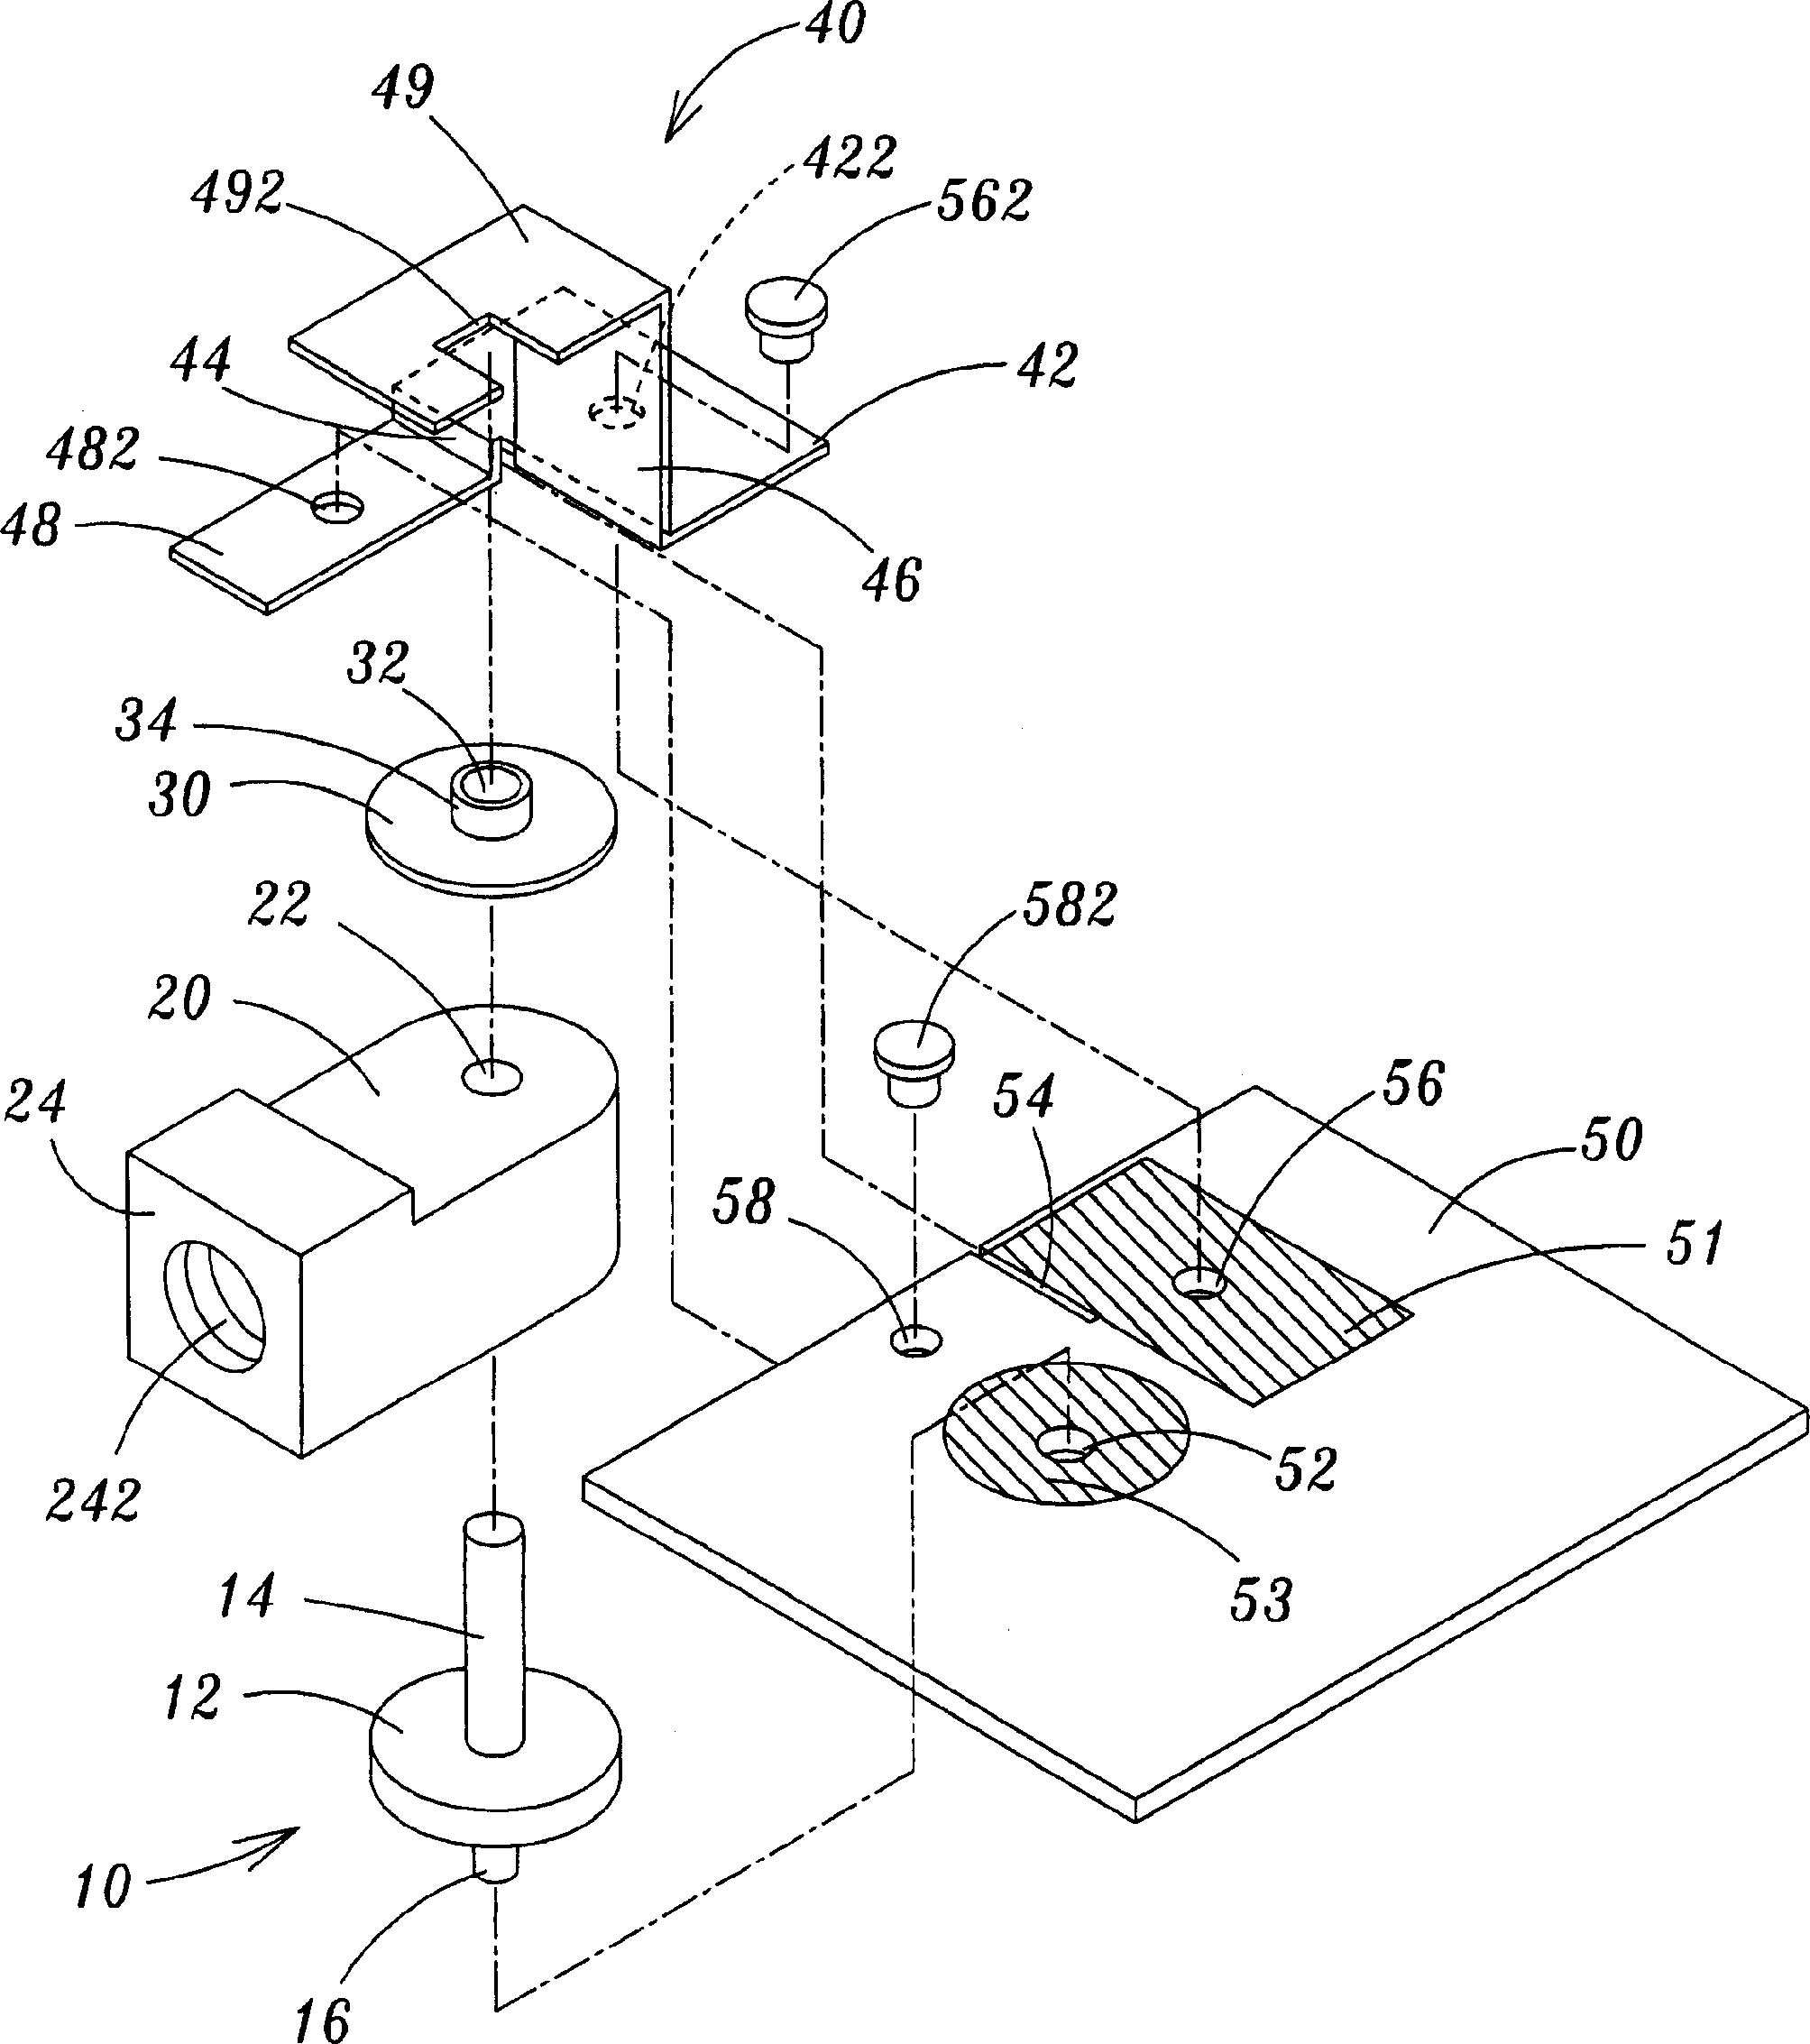 Antenna joint device capable of adjusting direction